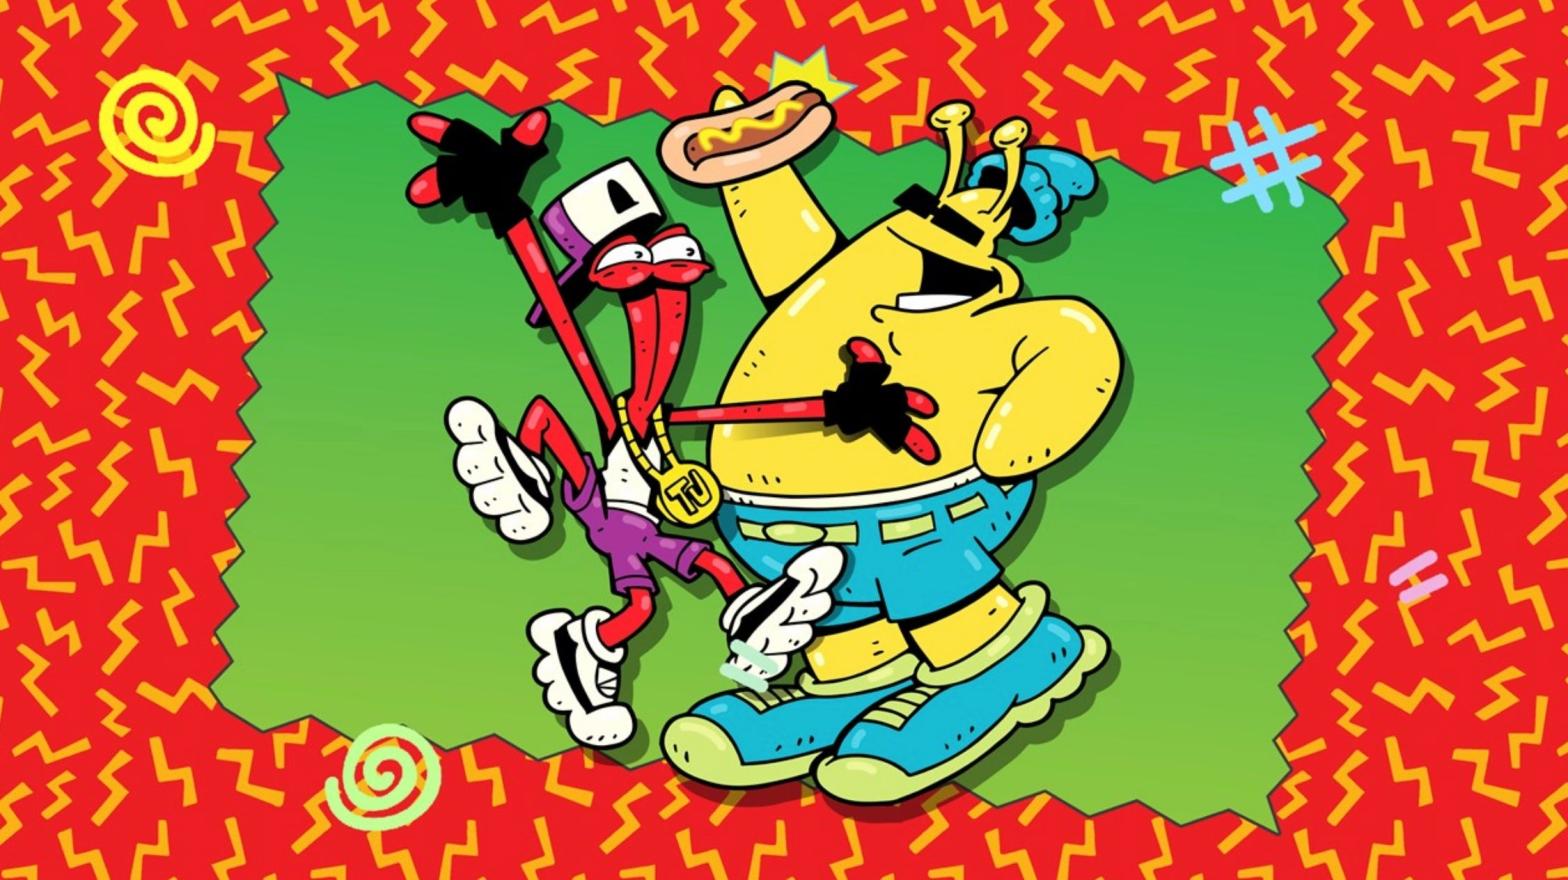 ToeJam and Earl as seen in their 2019 game, Back in the Groove. (Image: HumaNature Studios)